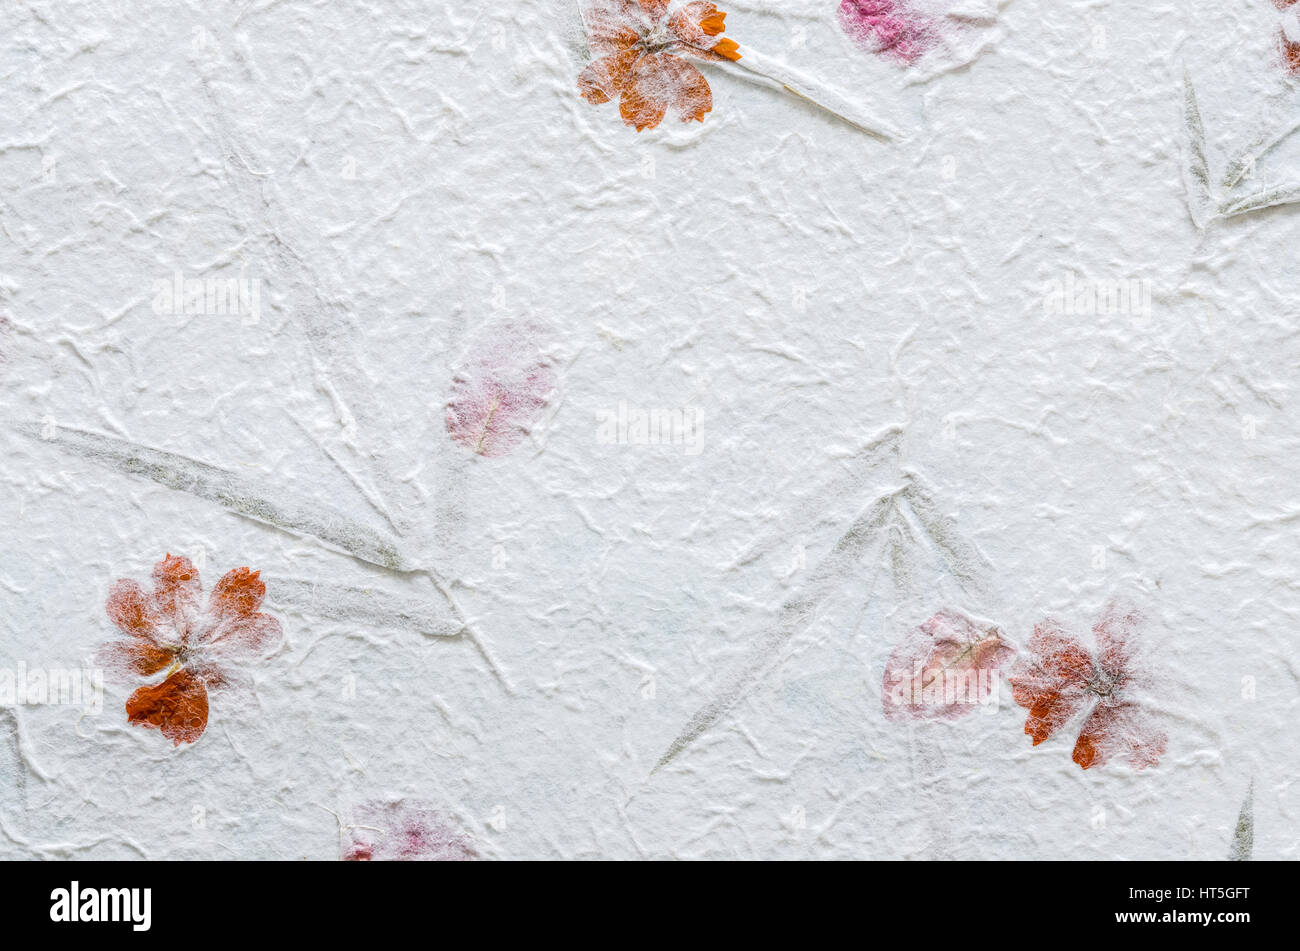 Mulberry paper background or handmade paper texture Stock Photo